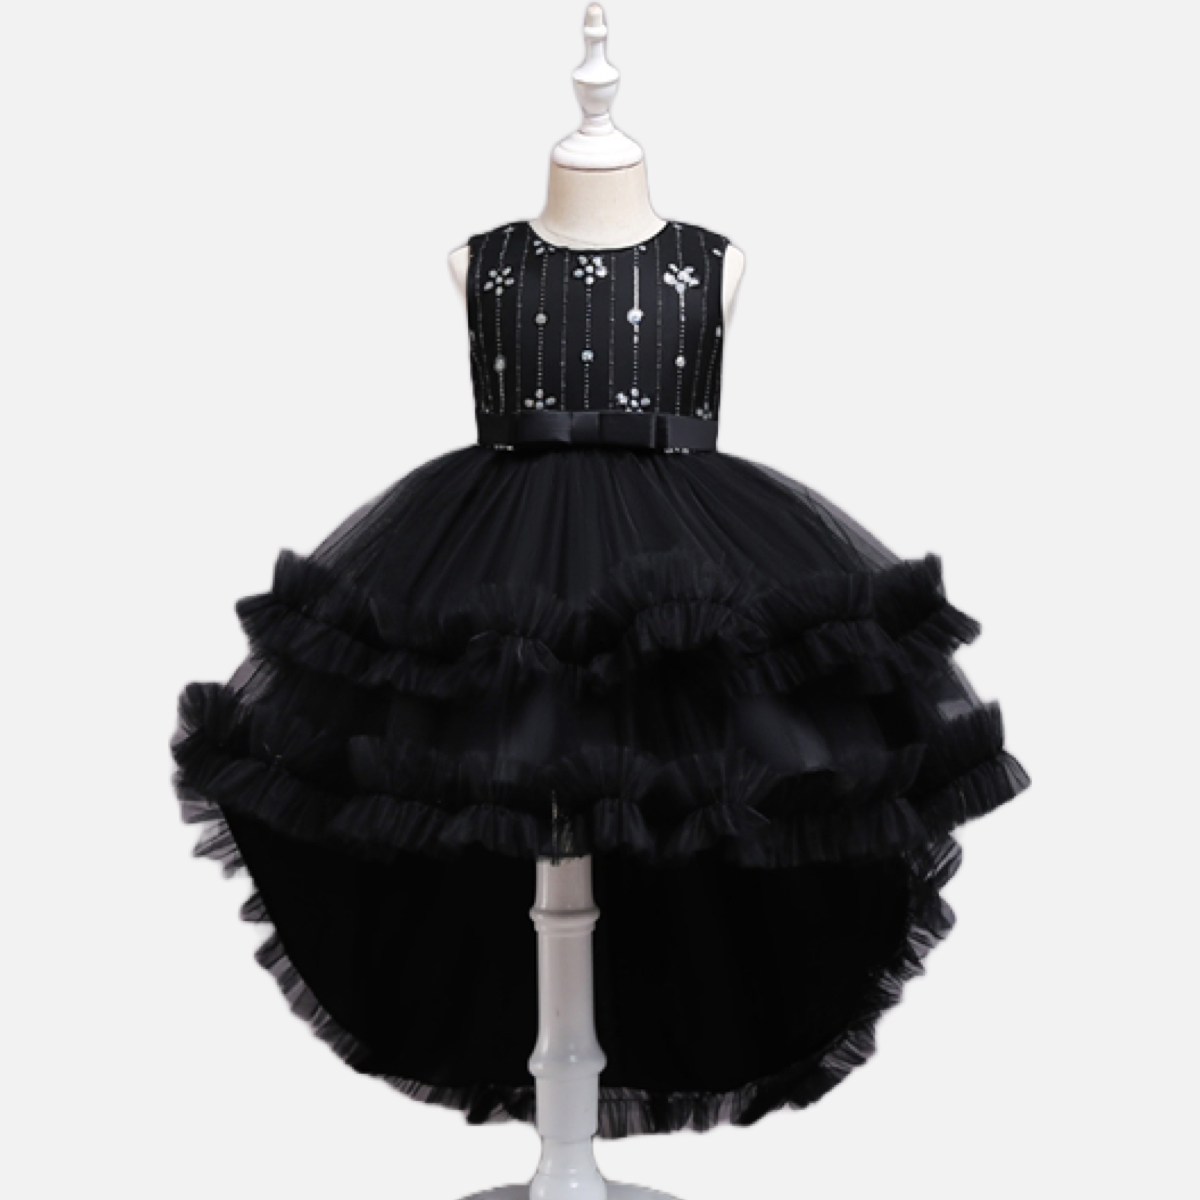 Black Tulle High Low Dress w/ Embroidered Sequin Flowers